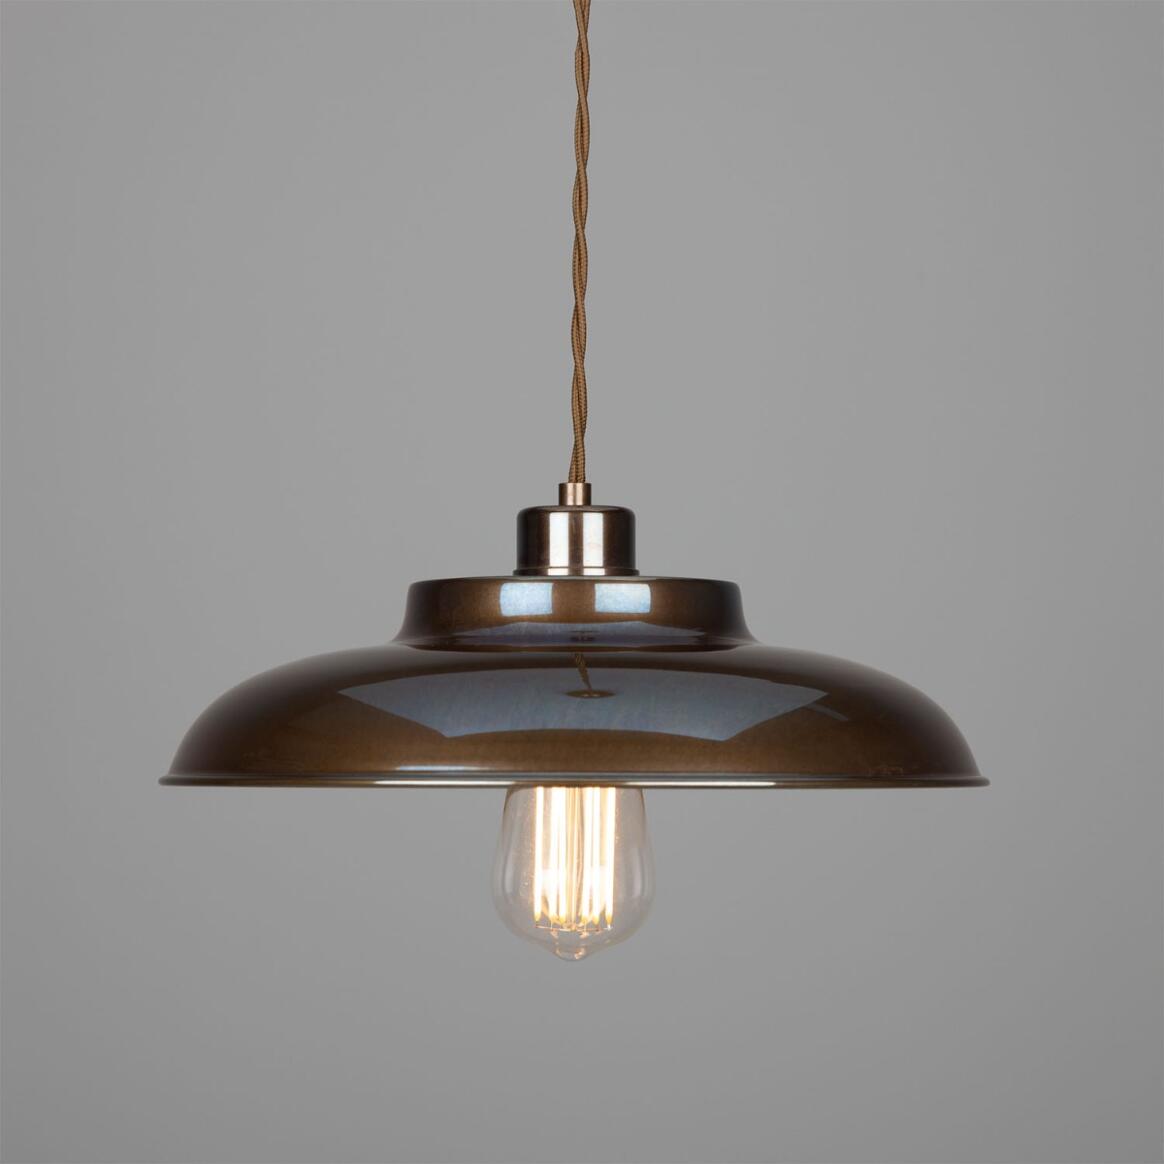 Telal Industrial Factory Pendant Light 32cm main product image